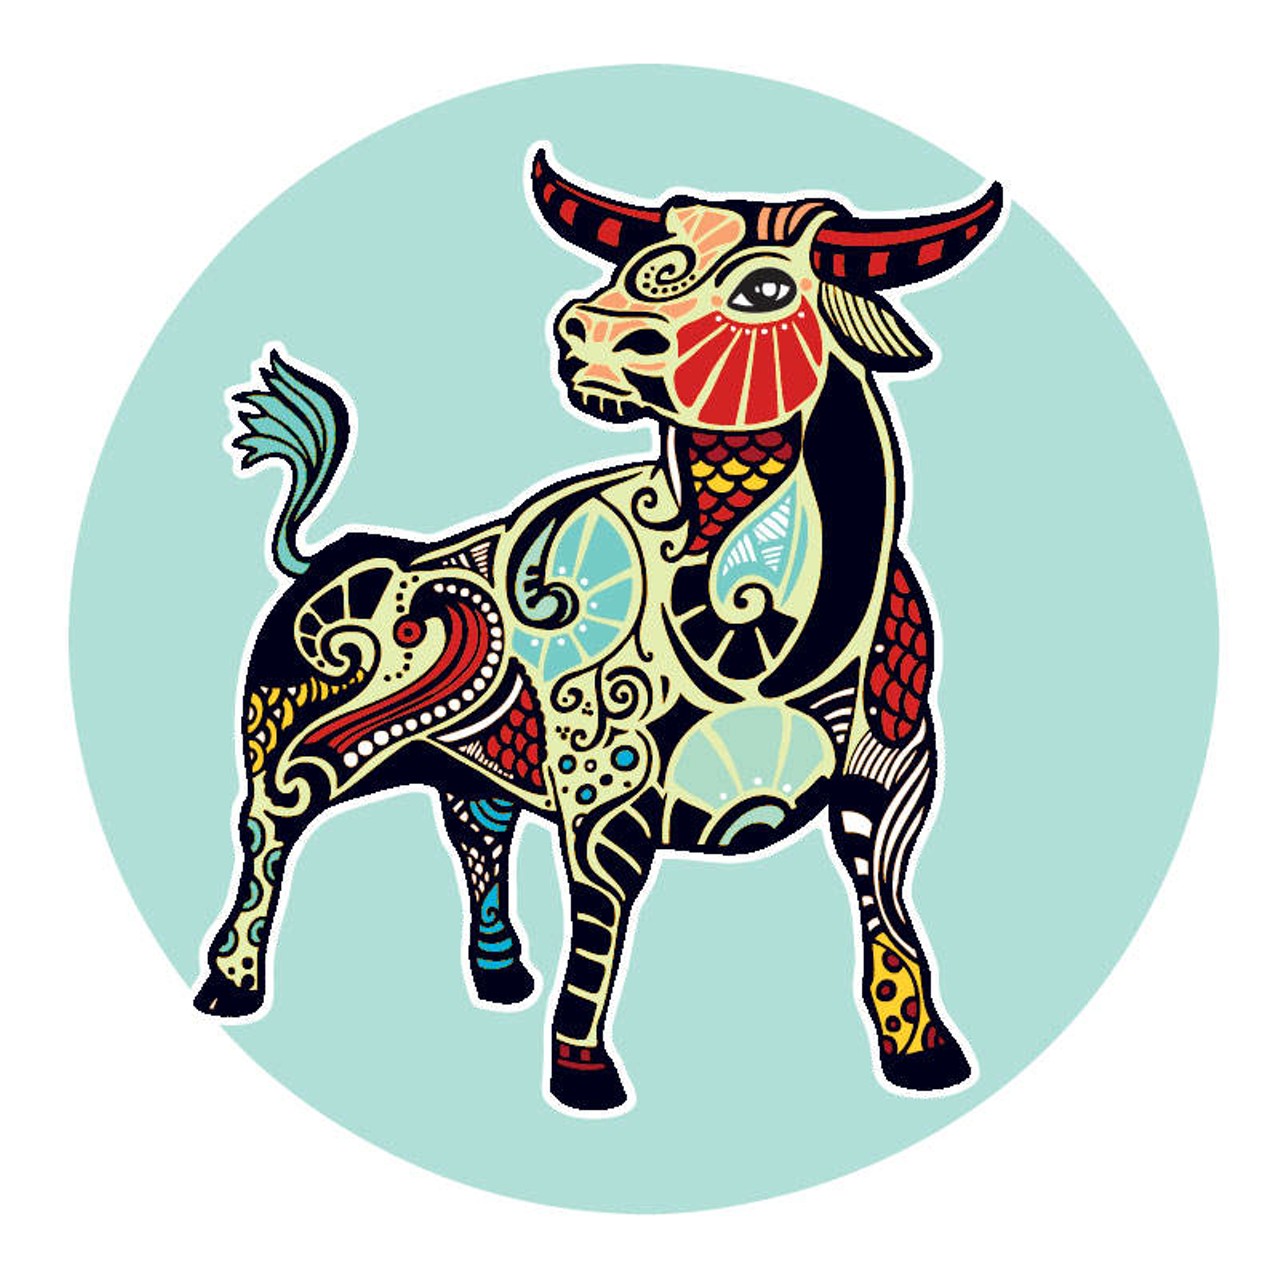 TAURUS: April 21 &#150; May 20
It&#146;s time to regroup. Recent shifts in direction demand that you rearrange your best laid plans. If you thought you would be free of this situation once and for all, guess again. Finding ways to make what&#146;s been going on forever more interesting is always a challenge but it will be less nuts once you realize that you can delegate most of what has been your job to those who have more of a feeling for it. While it&#146;s true that a changing of the guard would do much to improve things, it looks like you&#146;ve got to stand watch until the worm turns or until your reinforcements show up.